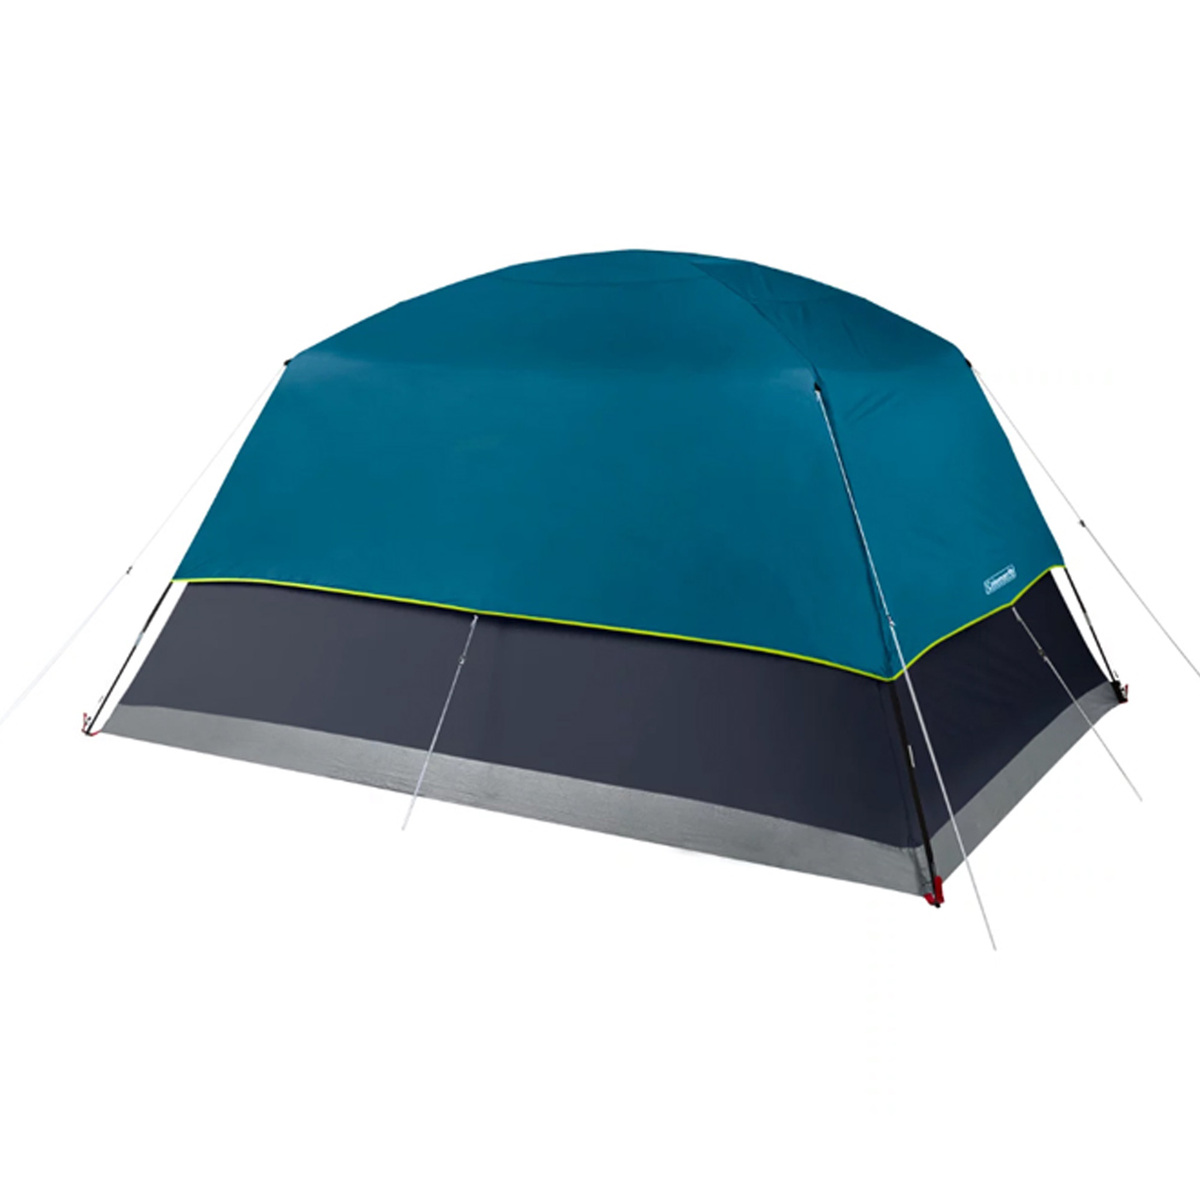 Coleman Tents kydome Darkroom 6 Persons 10 ft x 8 ft 6 in x 6 feet